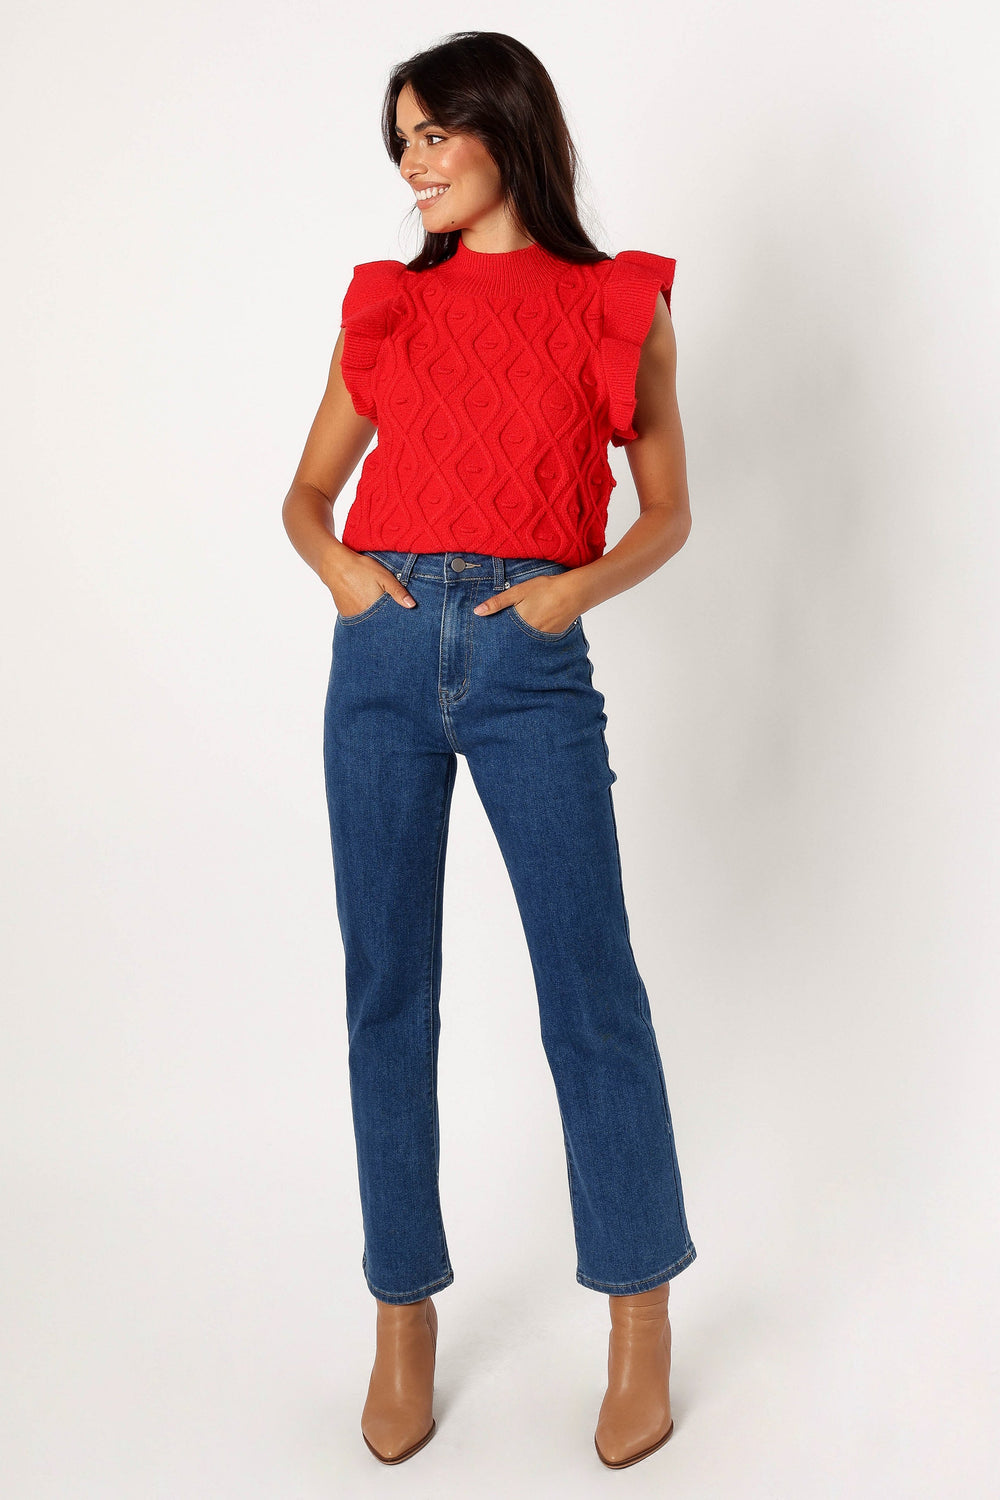 Petal and Pup USA TOPS Valerie Knit Top - Red